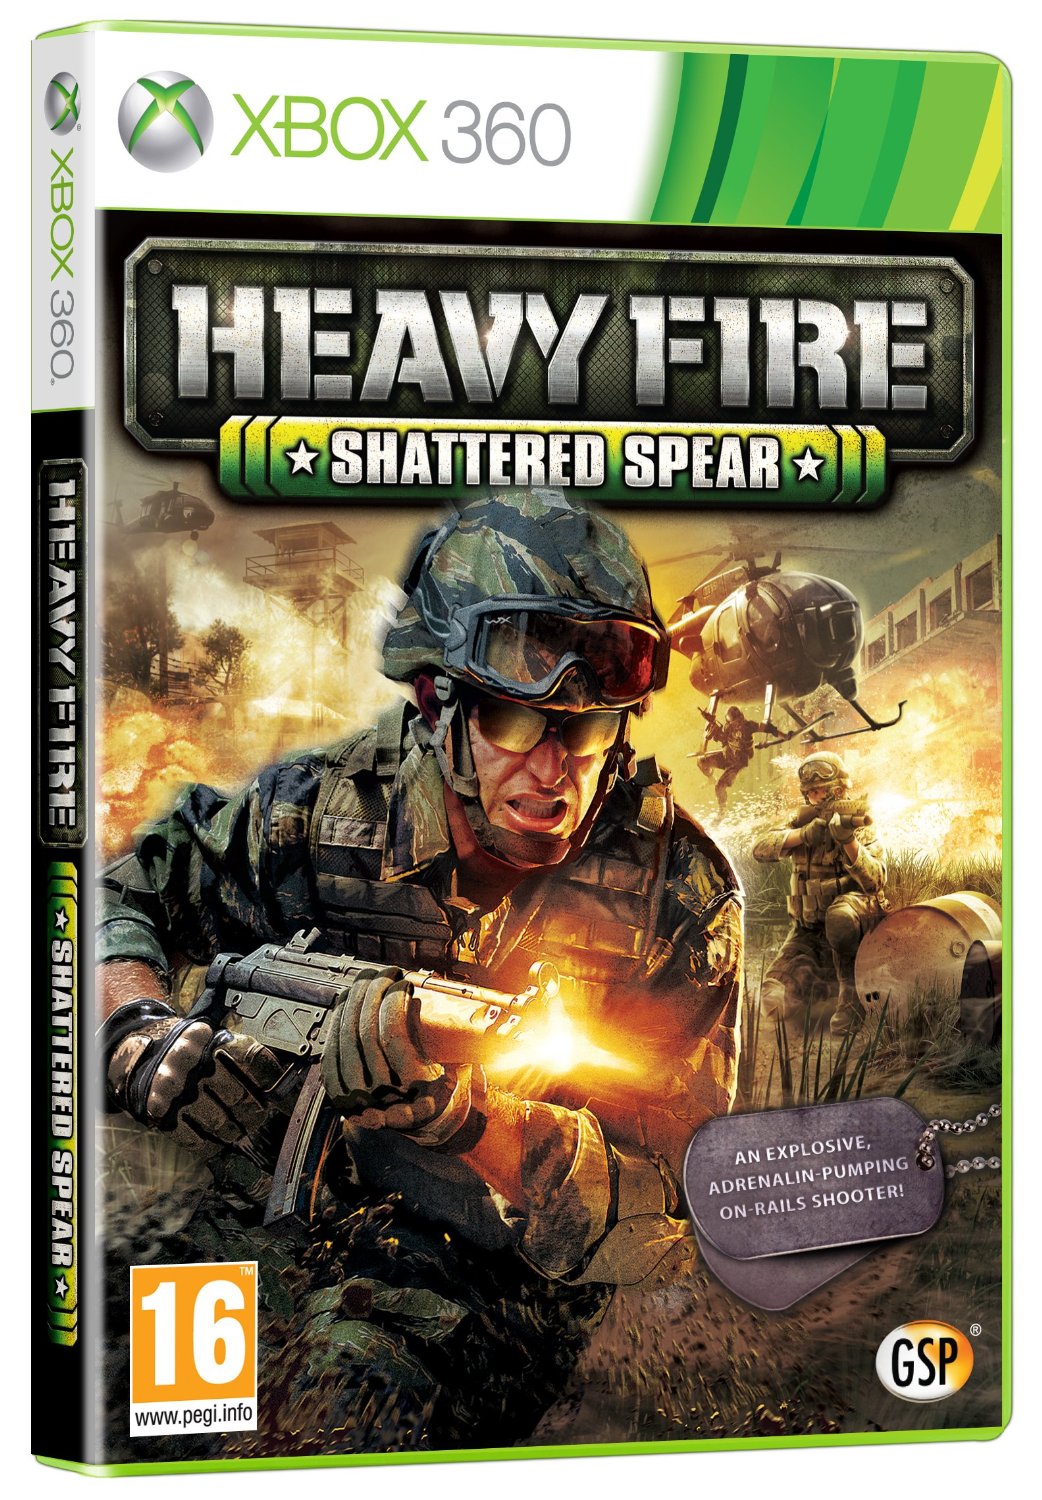 Heavy Fire: Shattered Spear Xbox 360